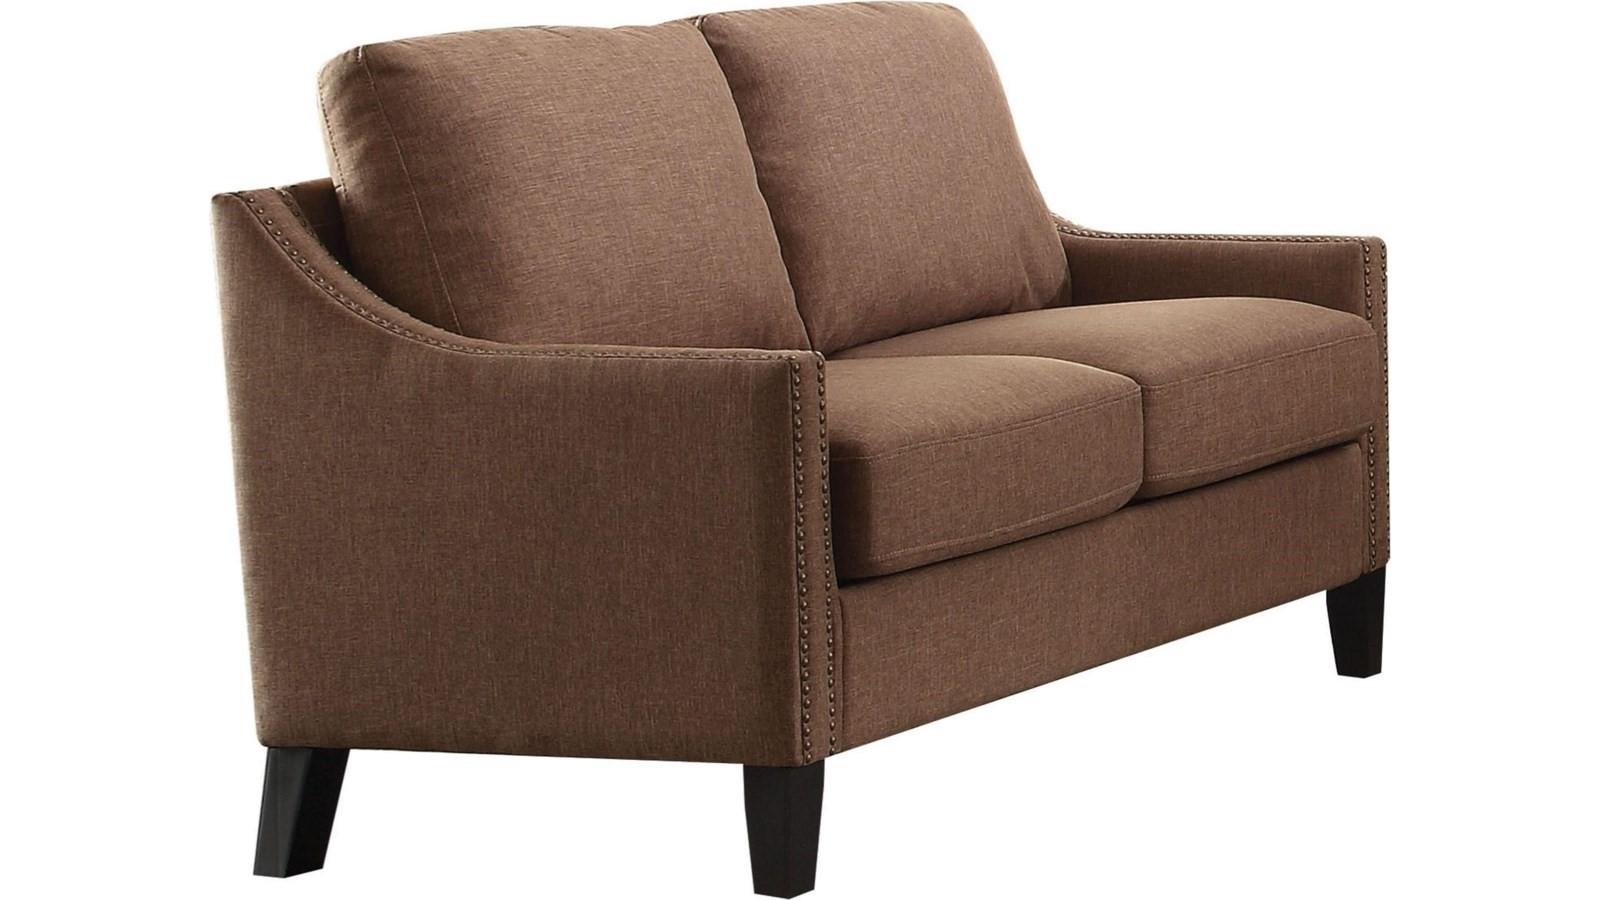 

    
Acme Furniture Zapata Sofa Loveseat and Chair Set Brown 53765-3pcs
